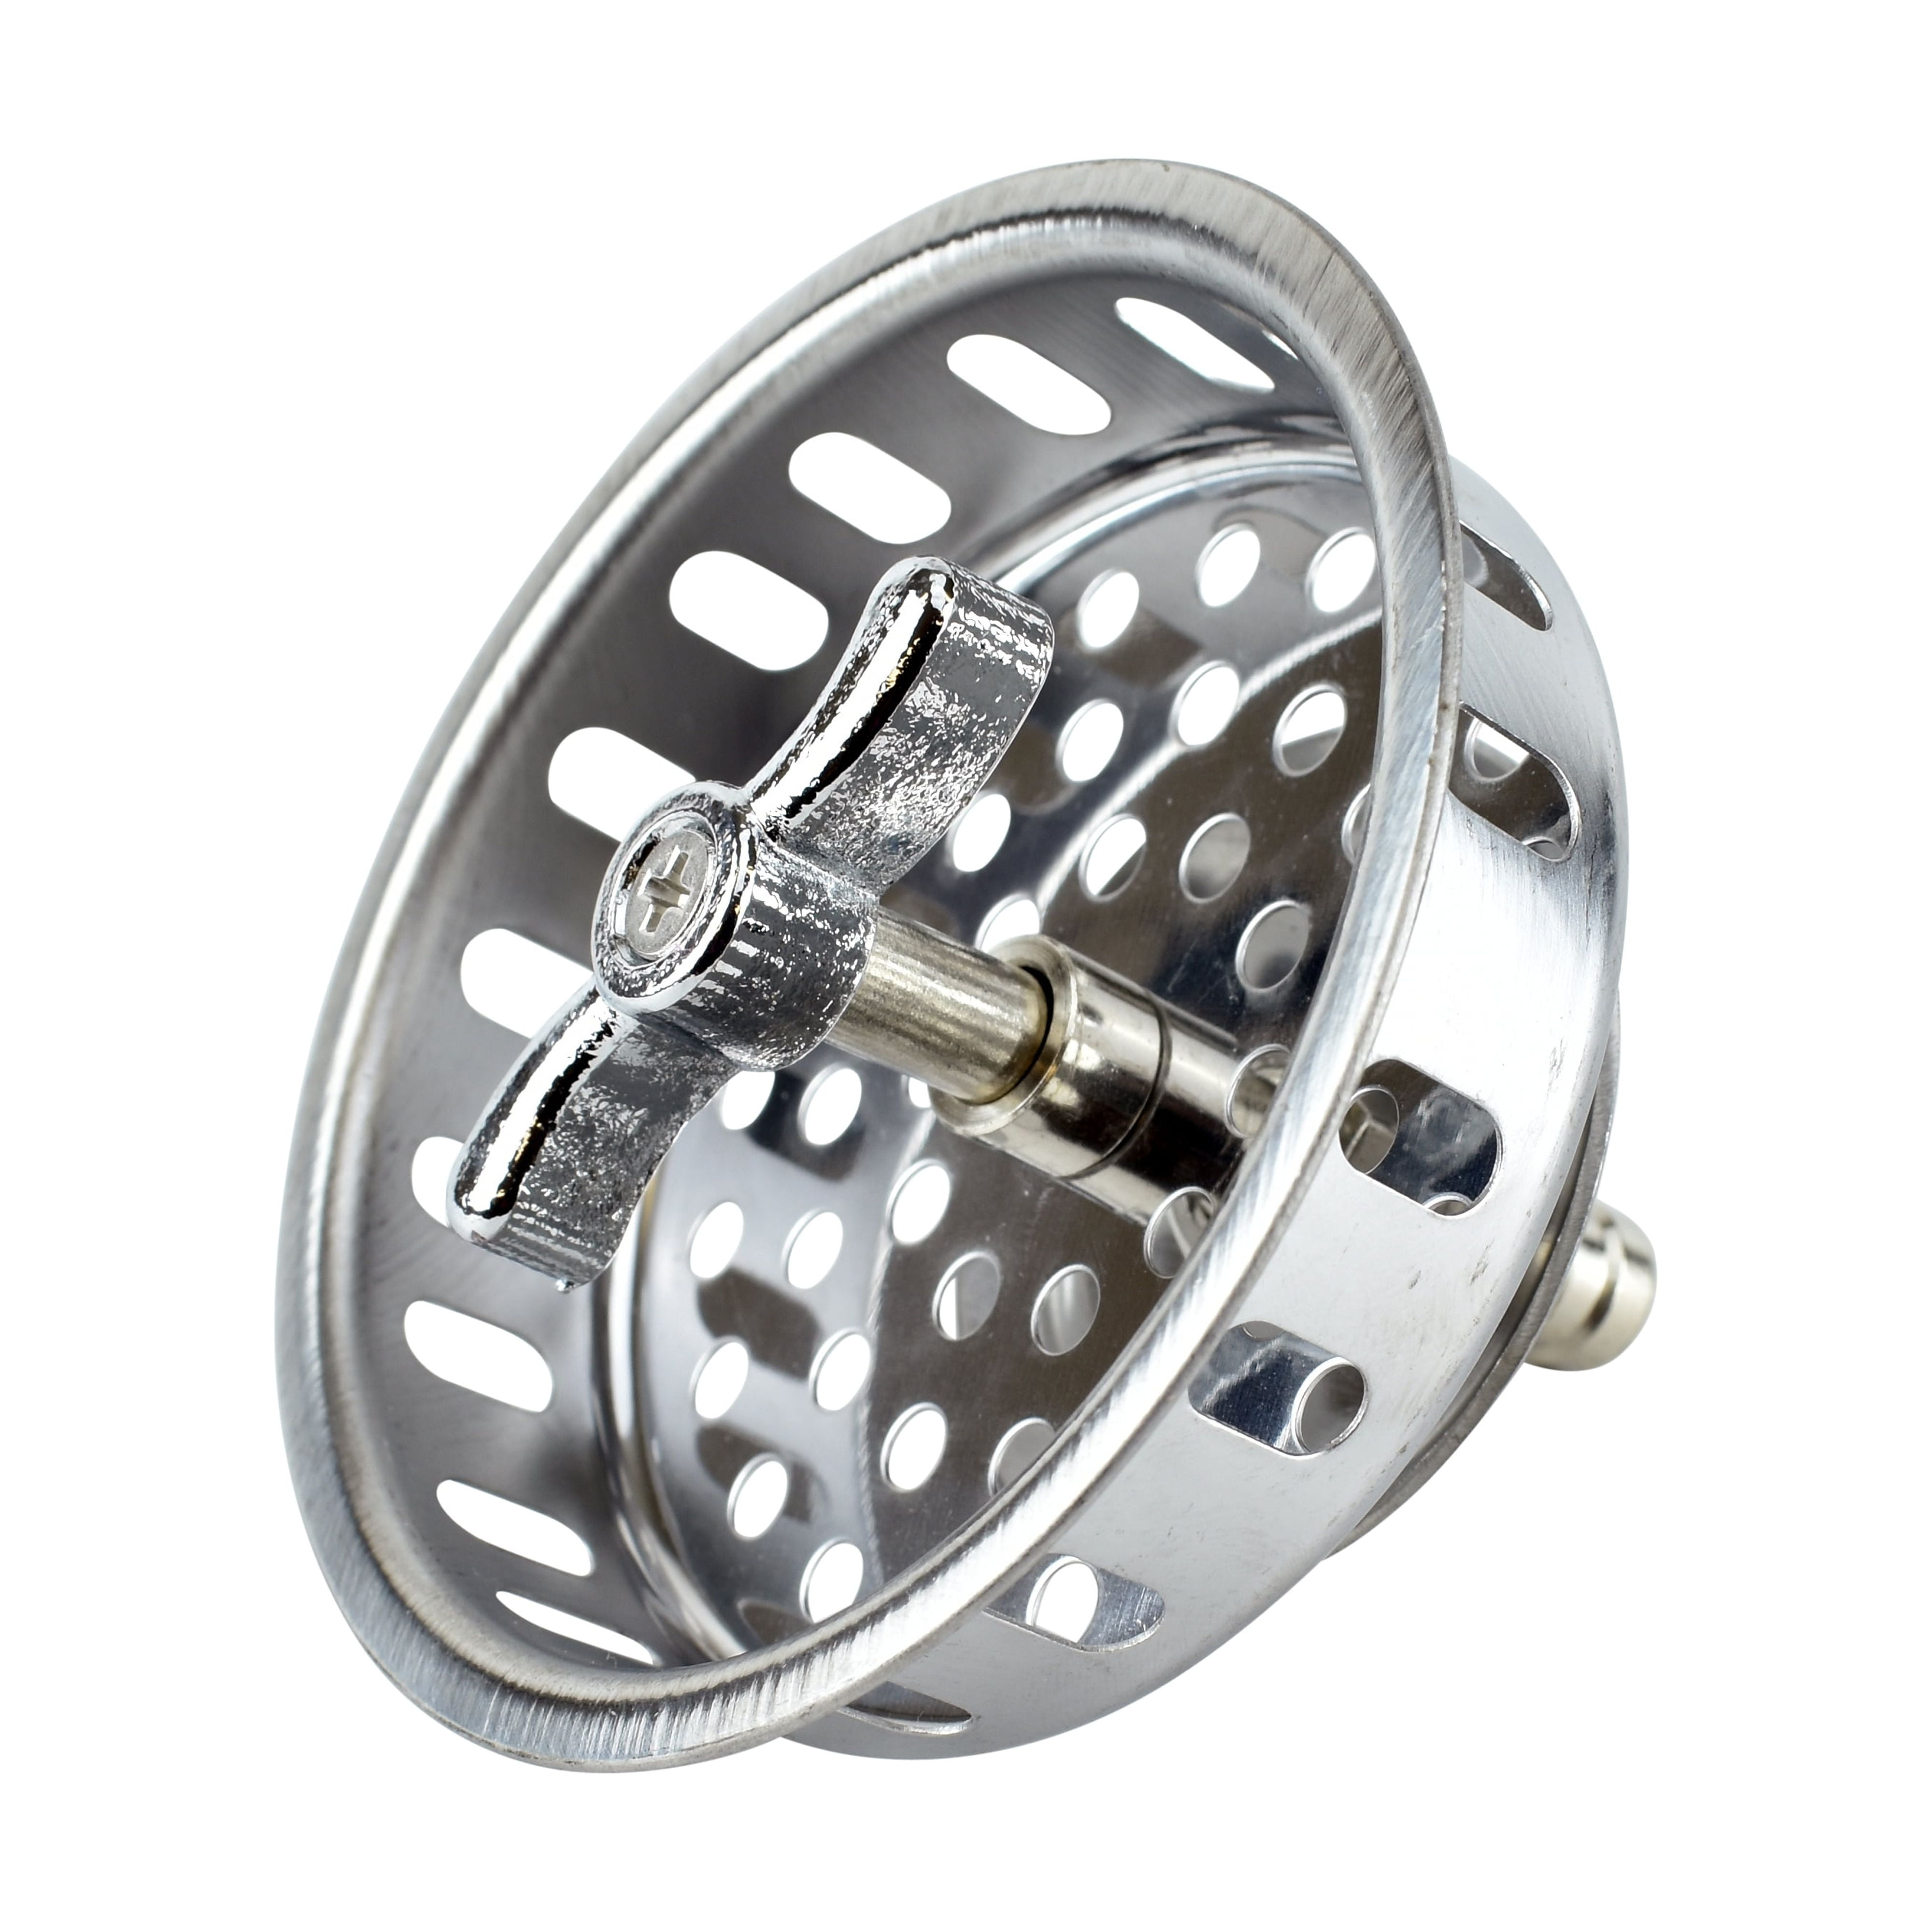 IPT Sinks Stainless Steel Strainer With Twist-To-Lock Stopper - STRAINER